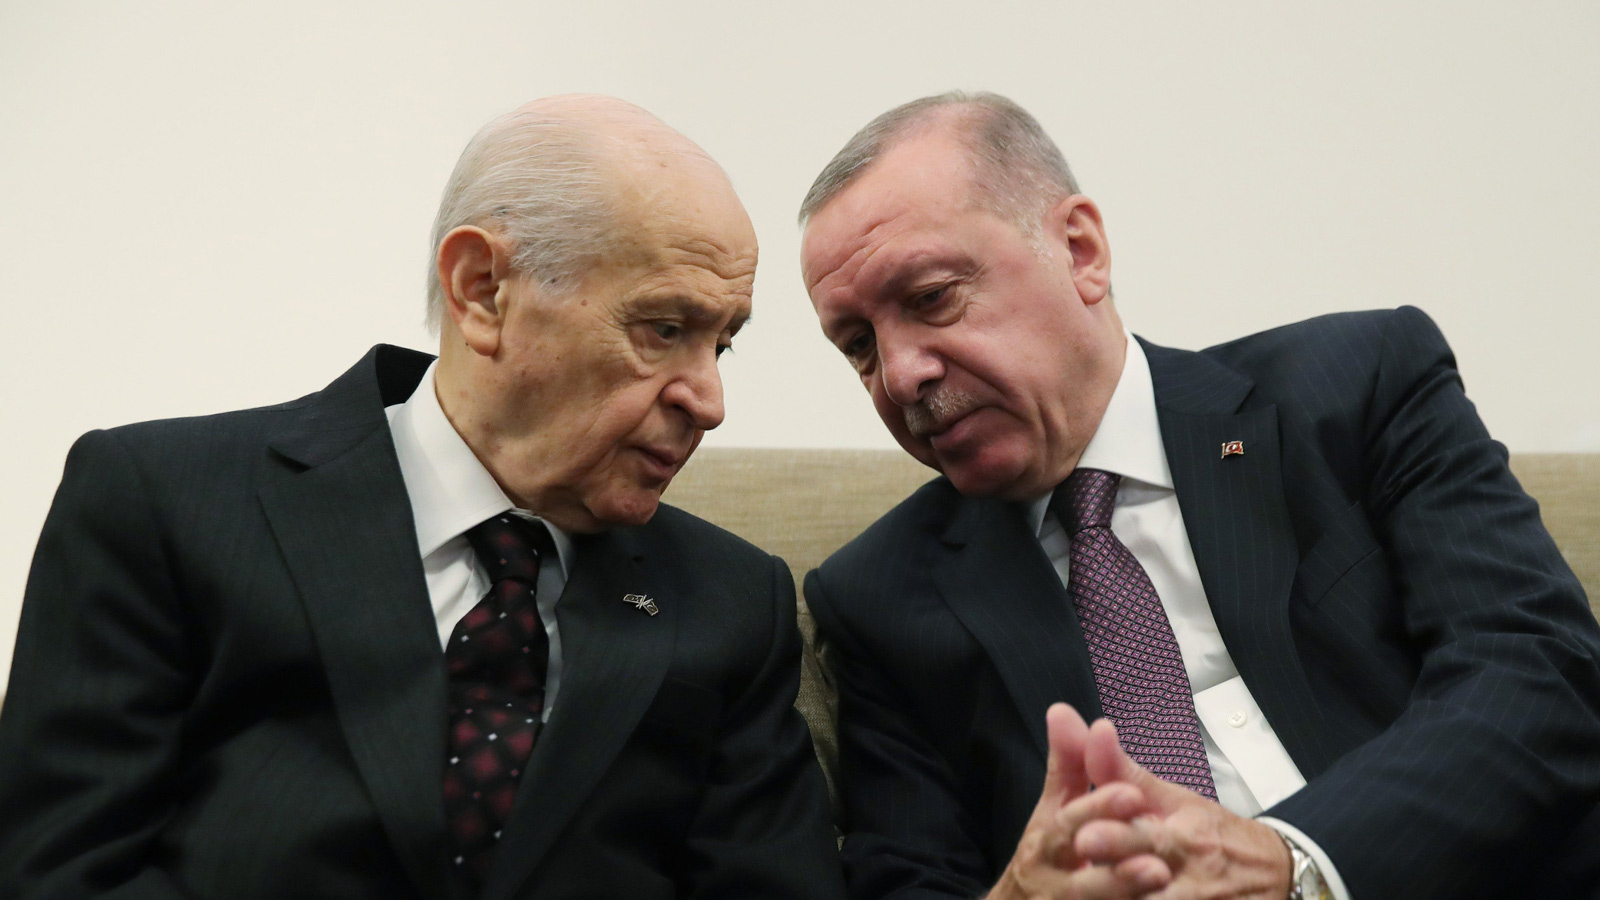 Snap elections in Turkey (again)? Unexpected move from the People`s Alliance